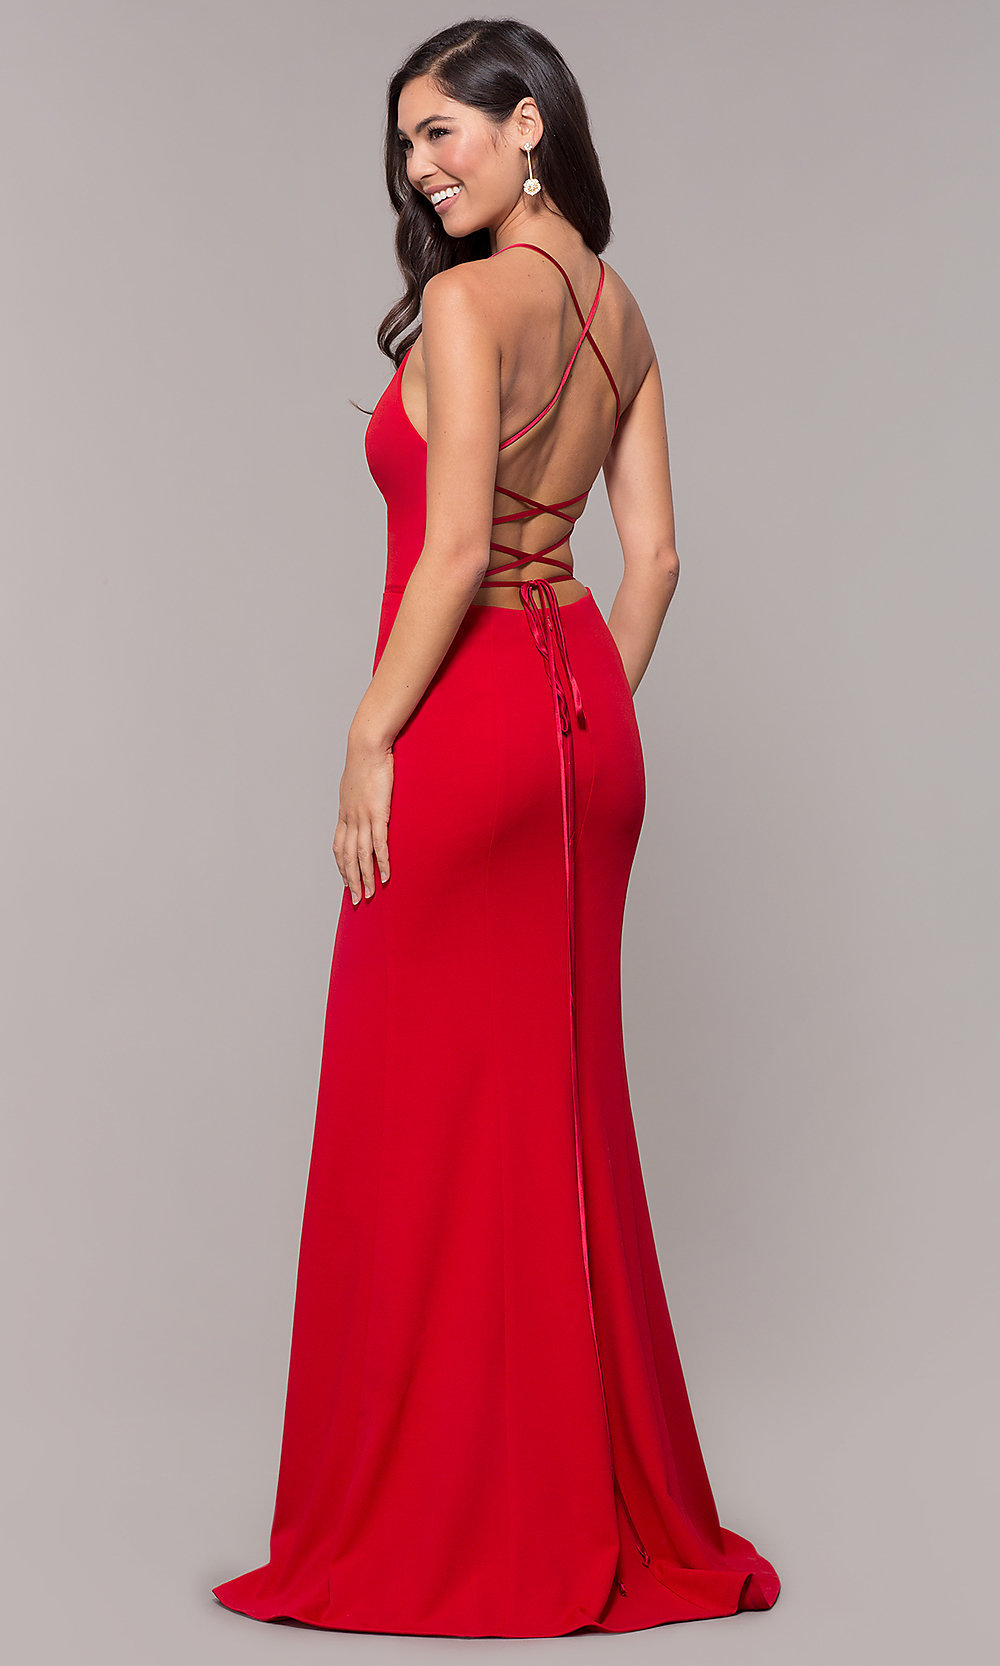 The-Open-back-cocktail-dress. 60+ Most Fashionable Semi Formal Wedding Dresses for Female Guests